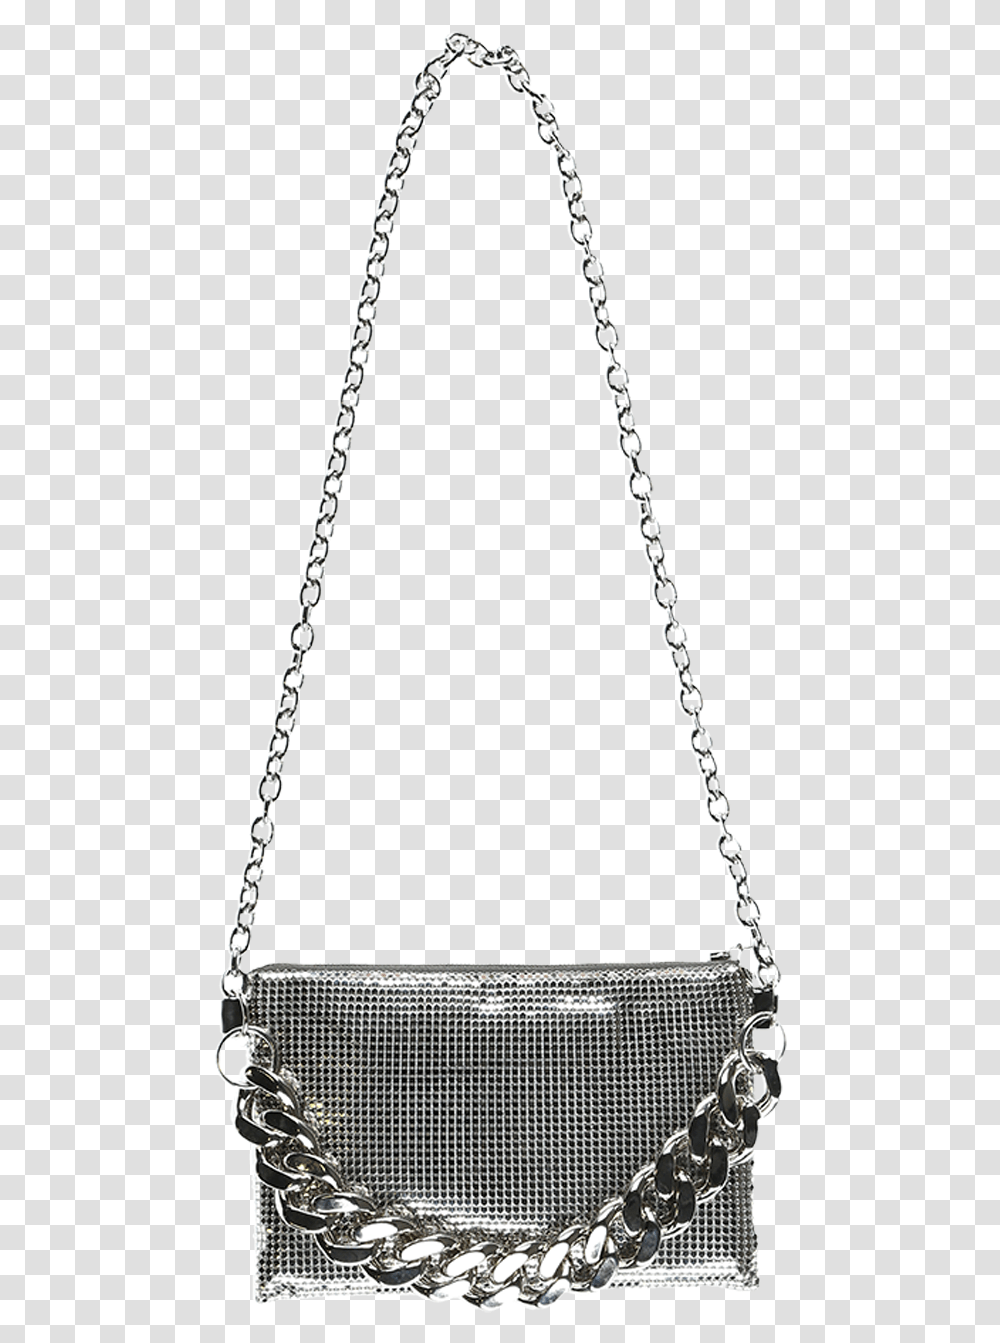 Kara Chain Mail Crossbody Bag Shoulder Bag, Necklace, Jewelry, Accessories, Accessory Transparent Png